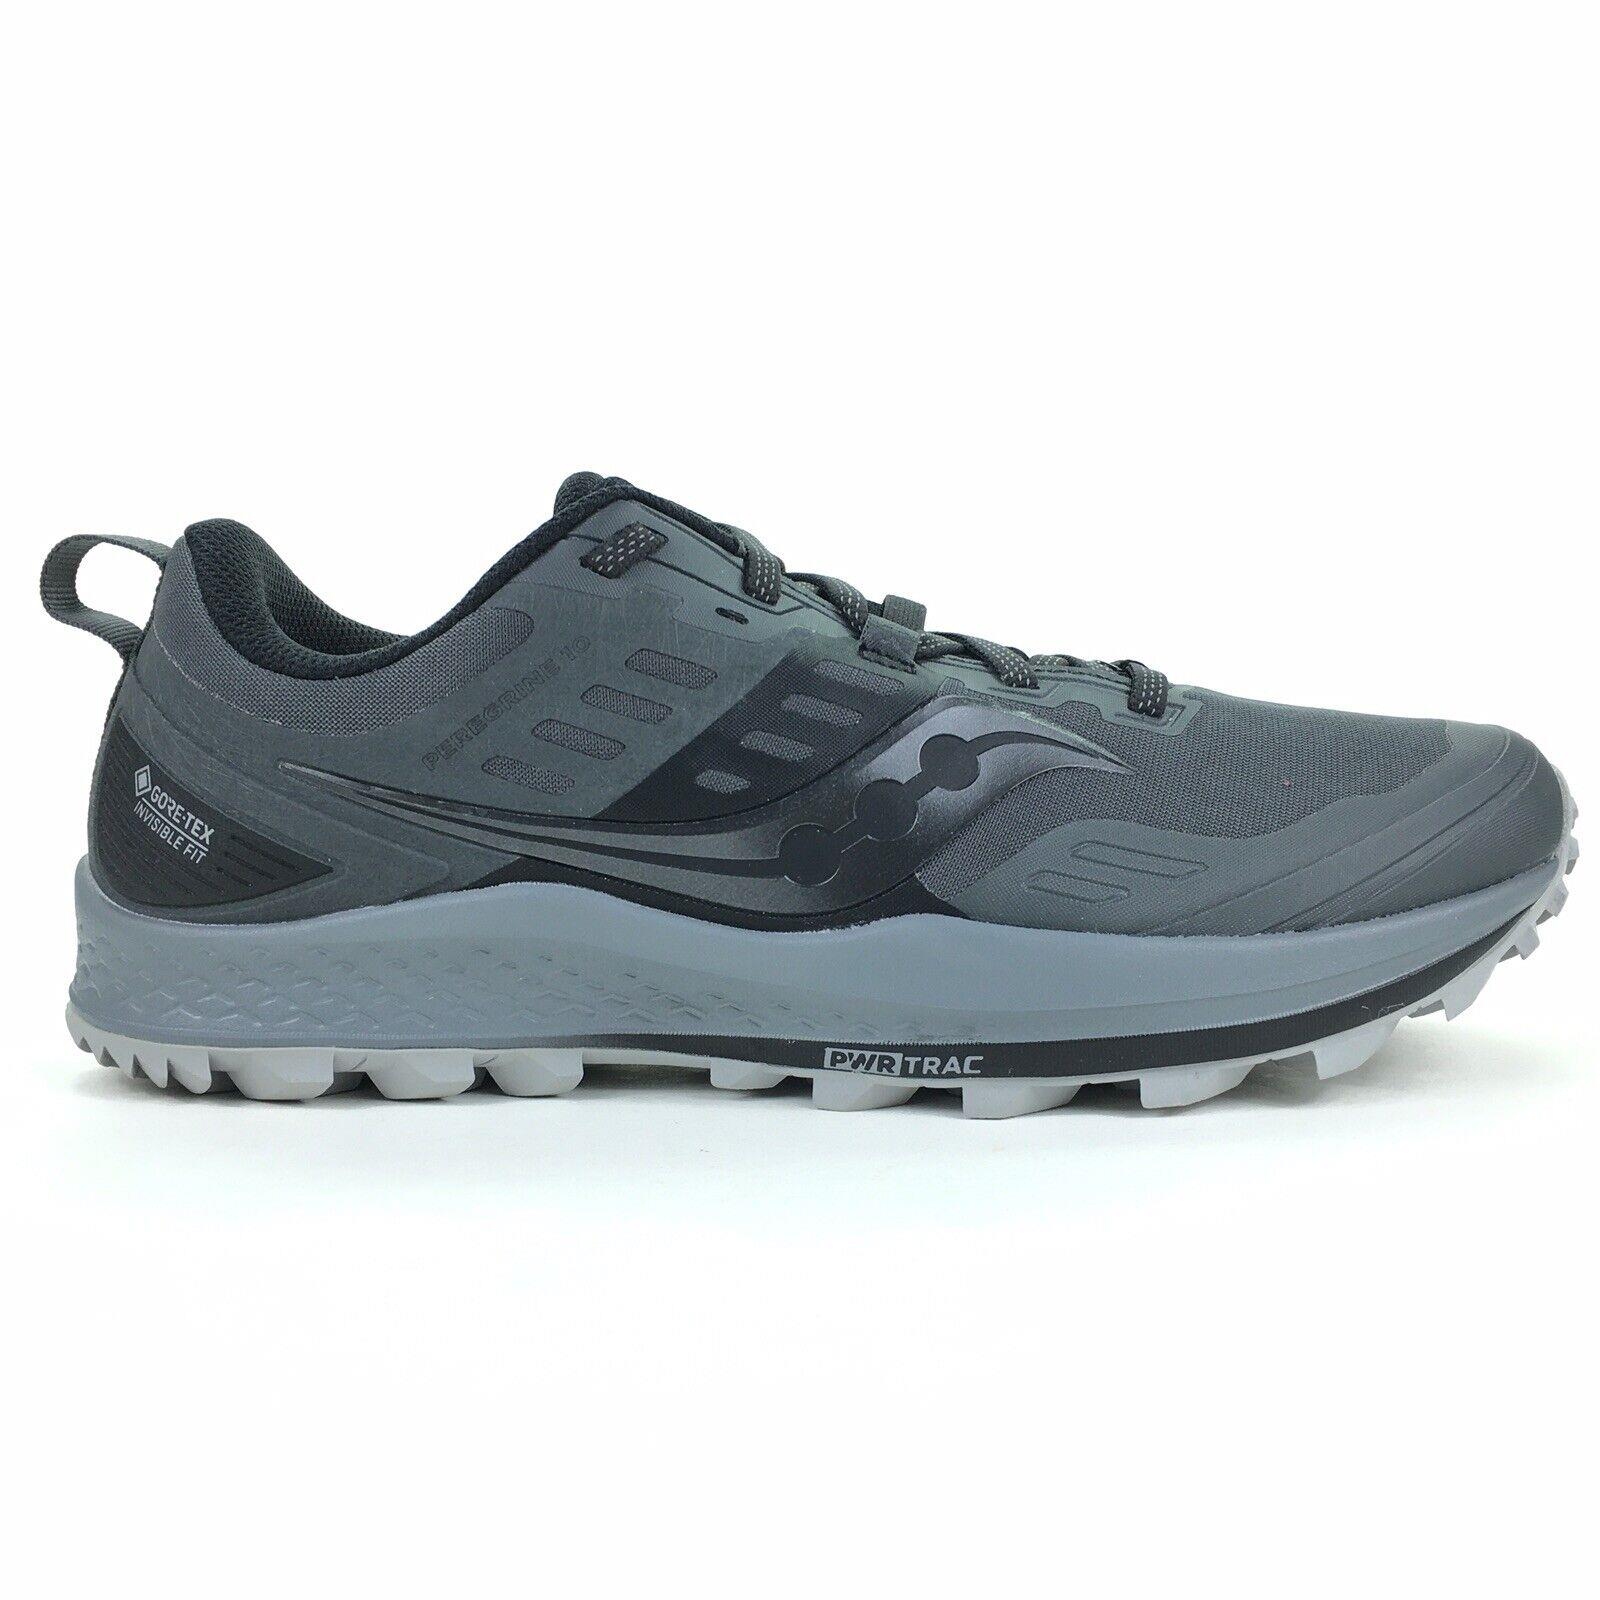 Saucony Peregrine 10 Gtx Mens Size 8 Athletic Trail Running Shoes Gray/black